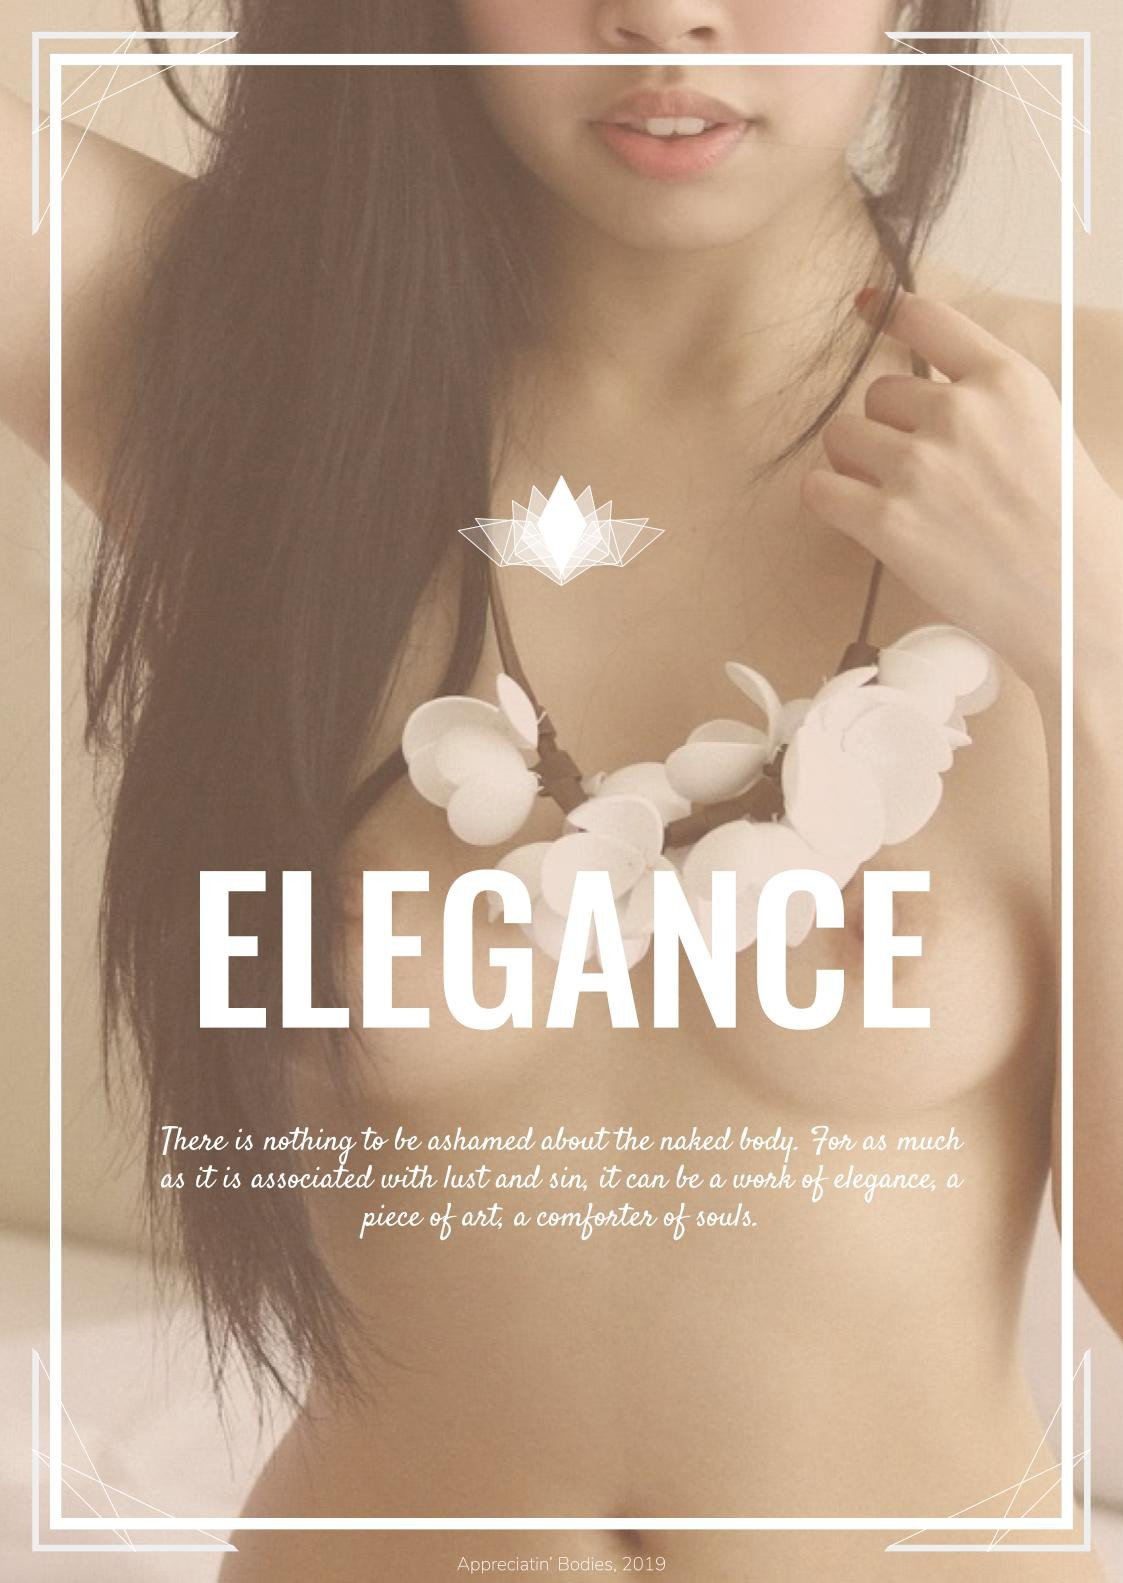 Photo by Appreciating Bodies with the username @TabAnd,  January 18, 2020 at 1:51 AM. The post is about the topic Amateurs and the text says 'Elegance. 

There is nothing to be ashamed about the naked body. For as much as it is associated with lust and sin, it can be a work of elegance, a piece of art, a comforter of souls'